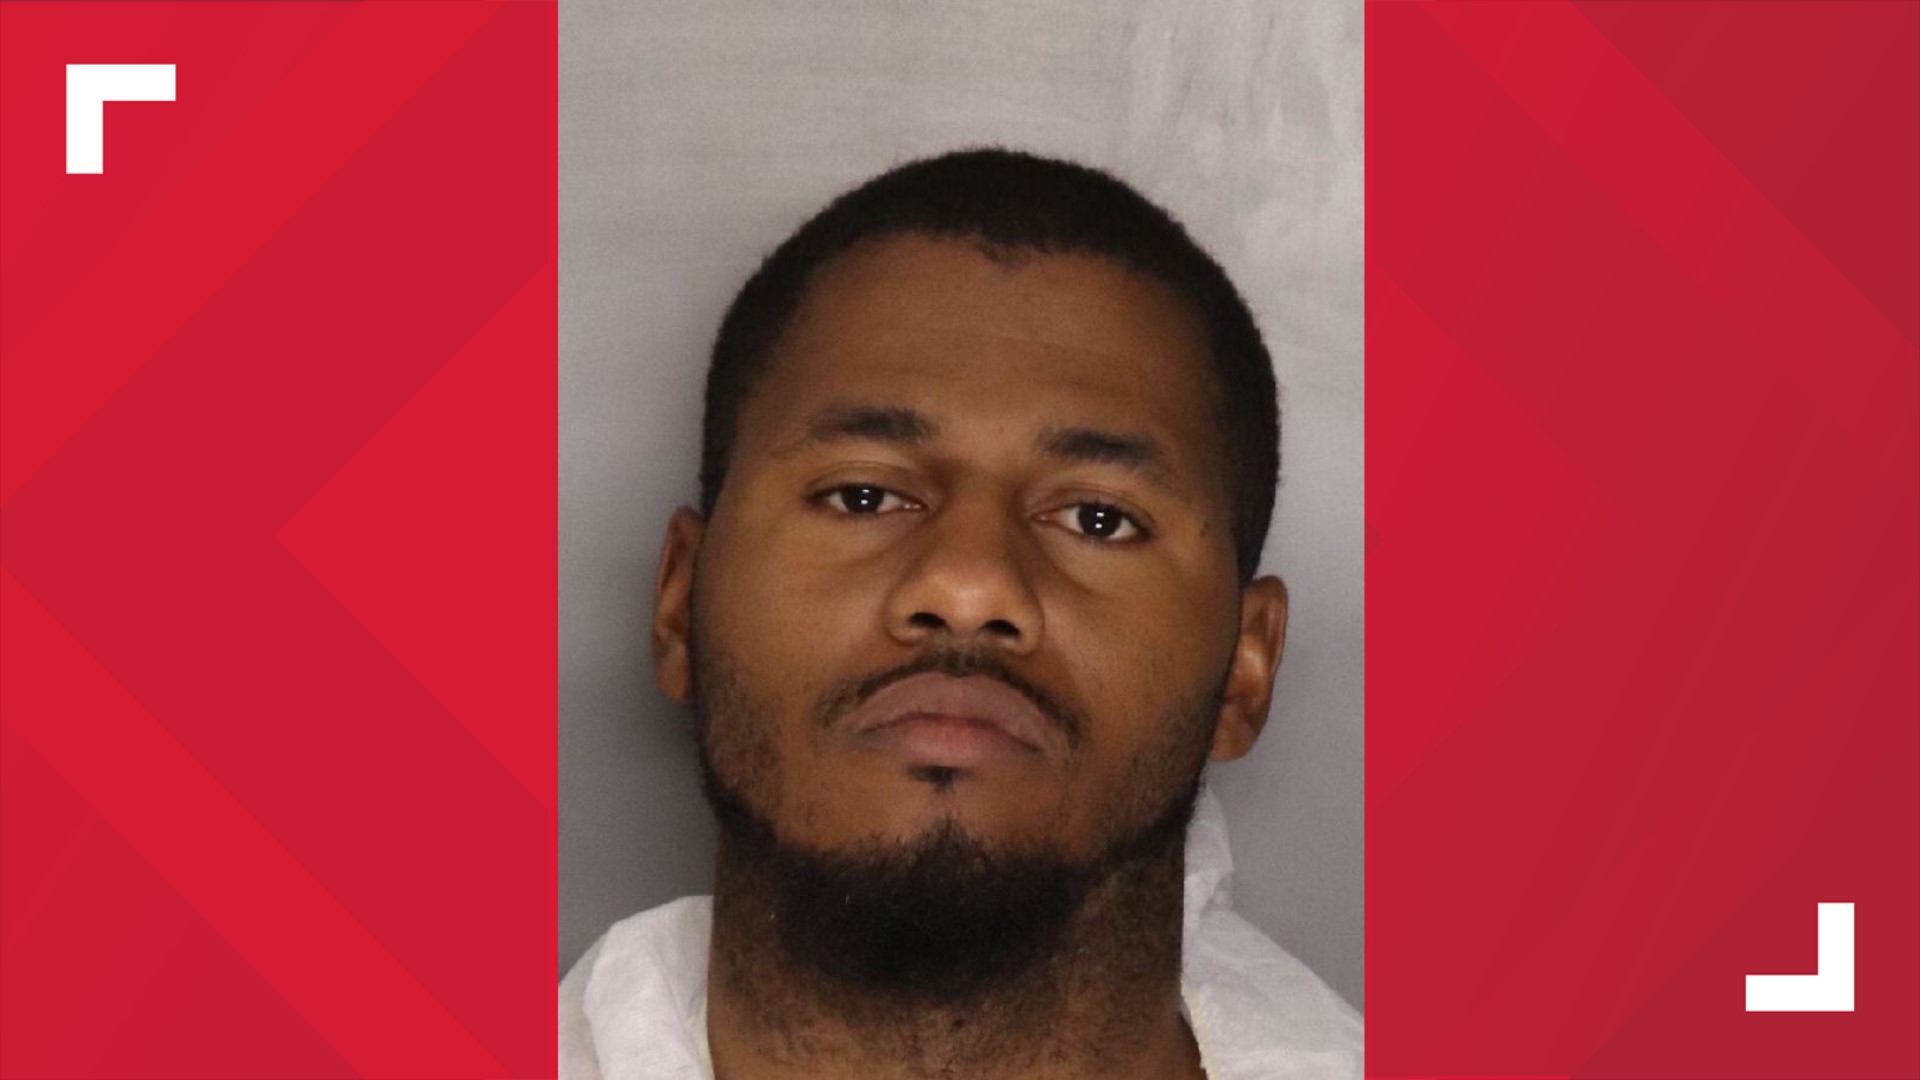 Deputies arrested the victim's husband, Shakel Samier Beasley, 27, on a murder charge. Officials said there are no other suspects outstanding in the case.